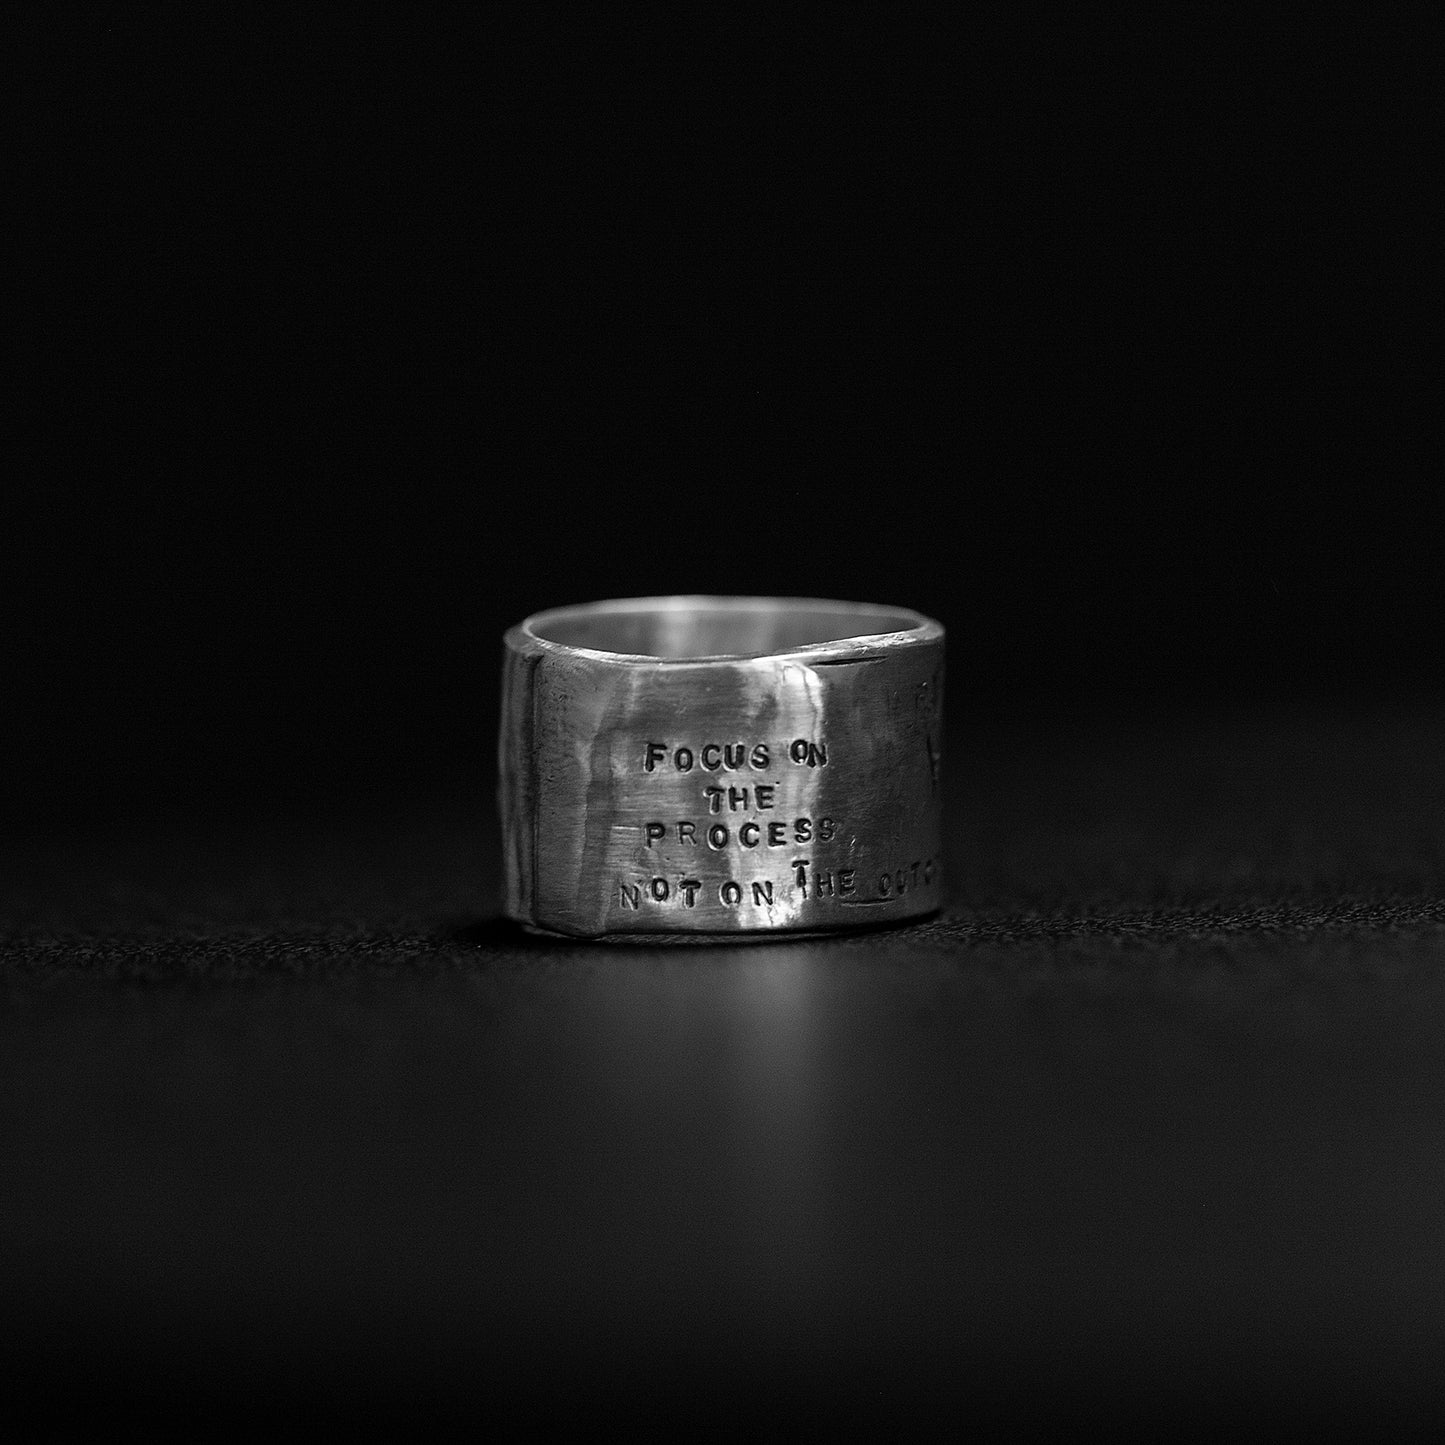 Rustic textured Sterling Silver Ring with Inspirational Message